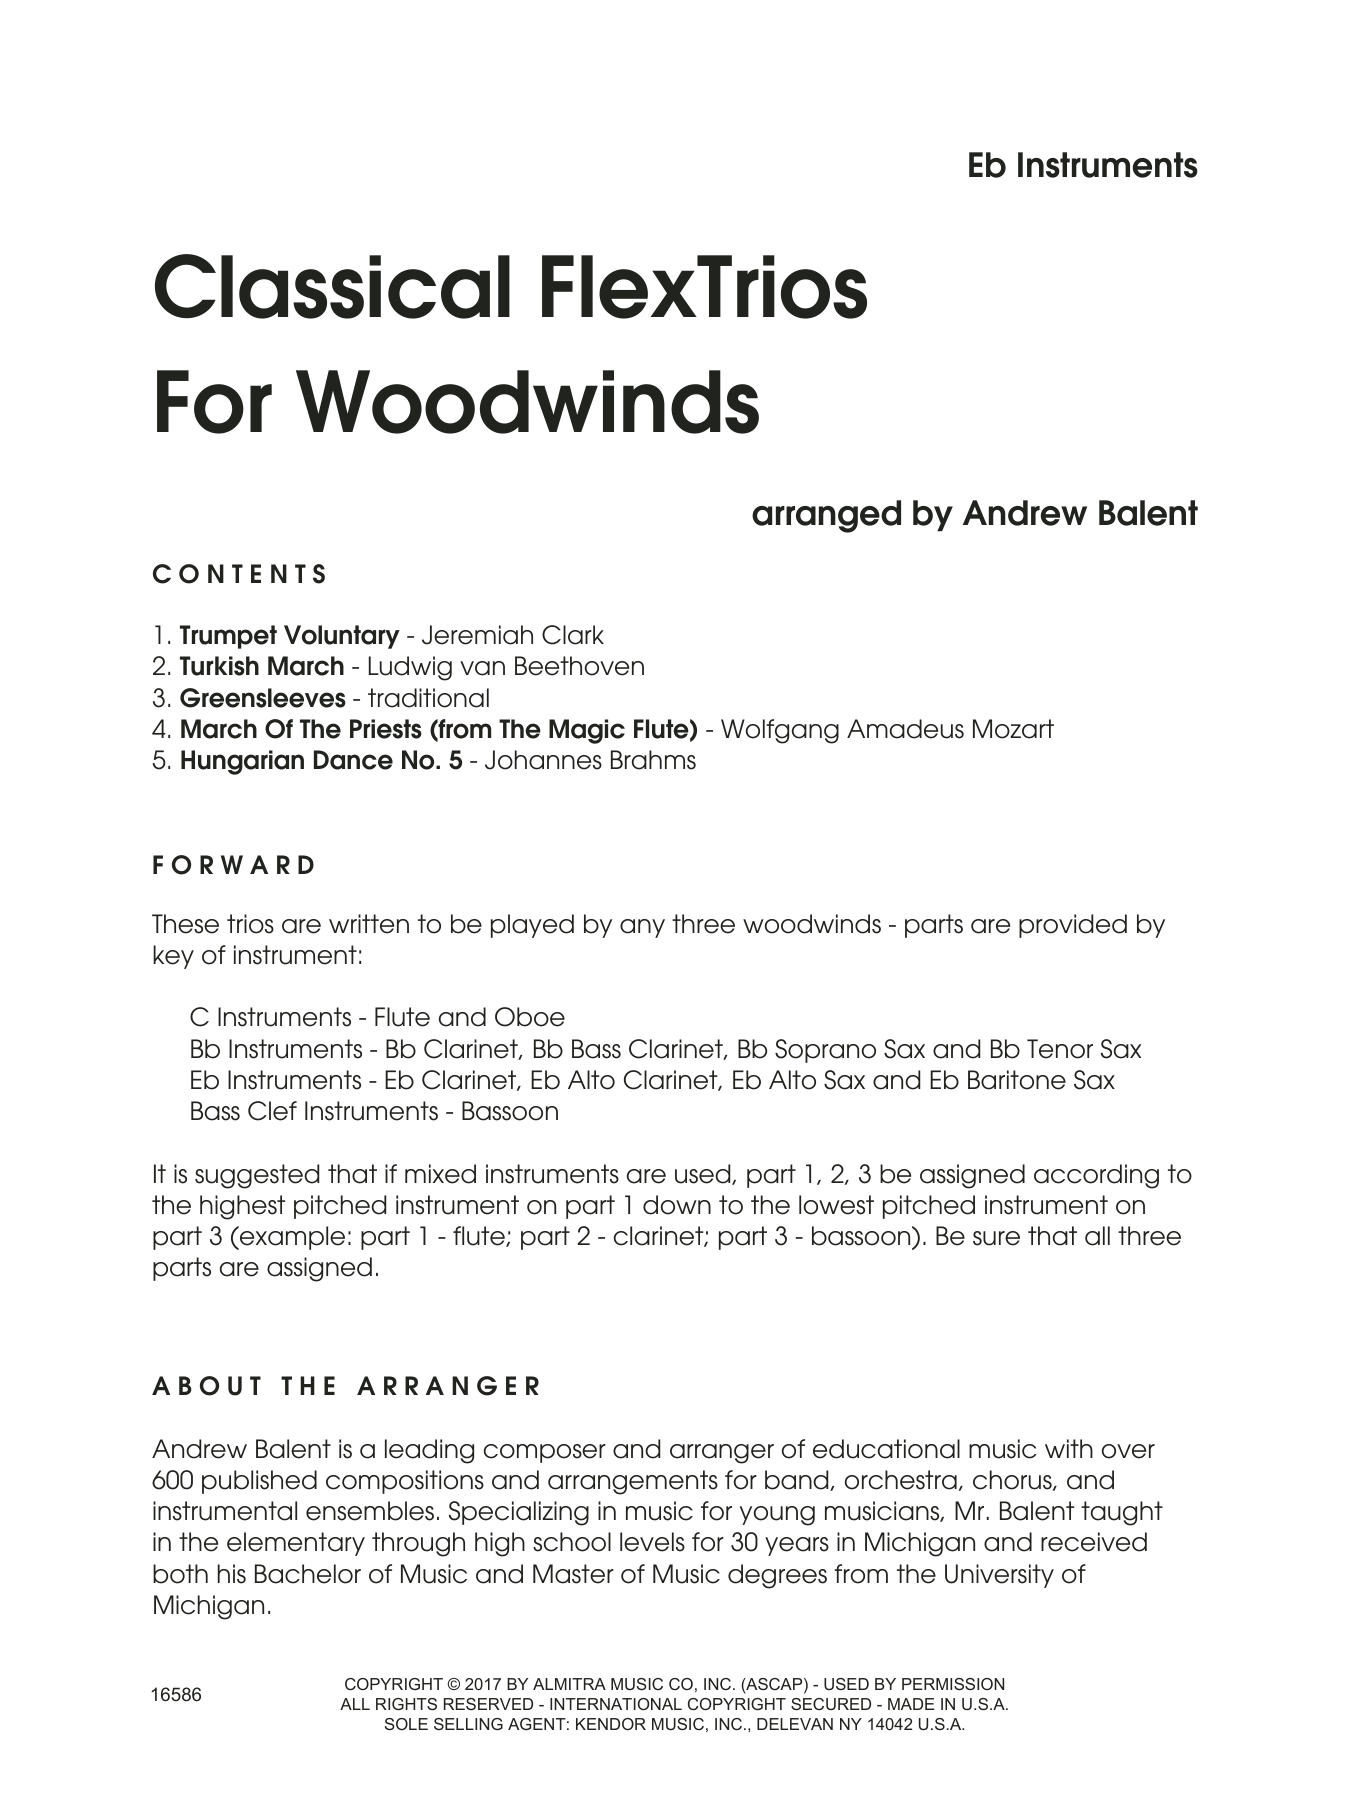 Classical FlexTrios For Woodwinds - Eb Instruments (Woodwind Ensemble) von Andrew Balent